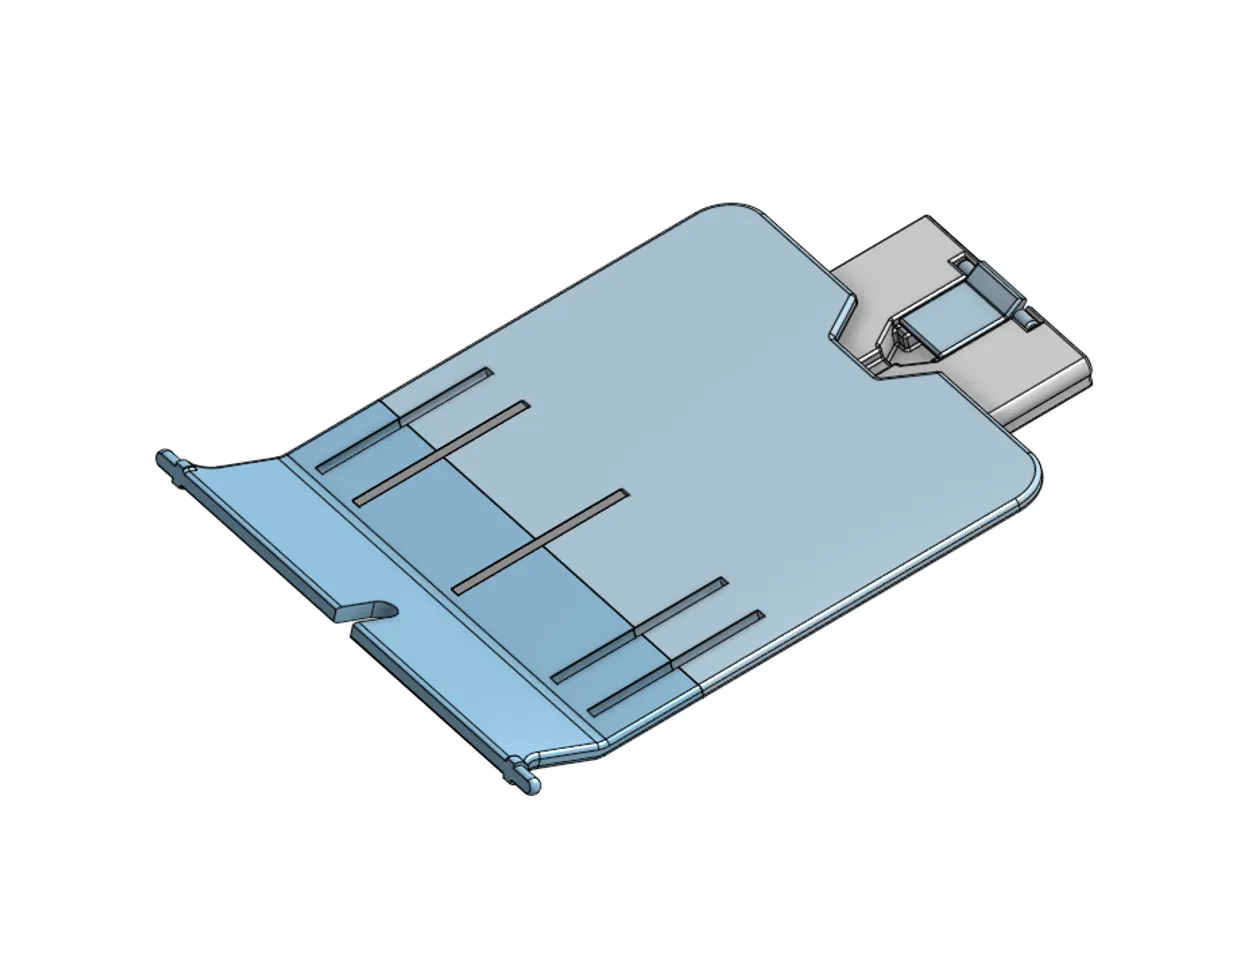 Laser Printer Paper Delivery Output Tray Assembly for HP P1006 (and others)  by kaje, Download free STL model